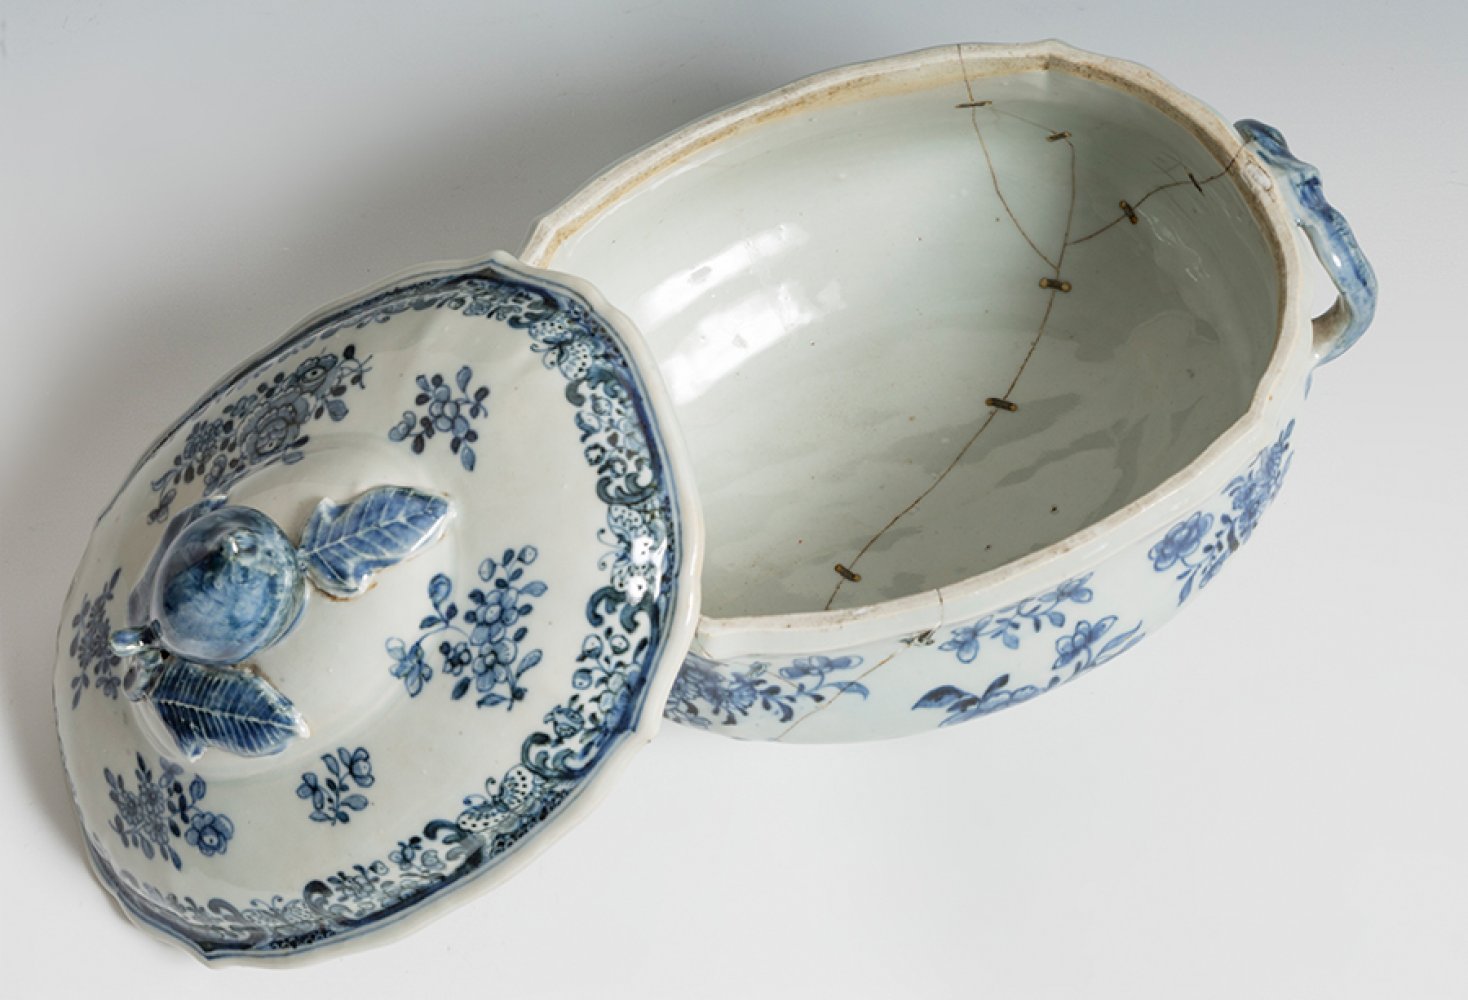 Chinese tureen, 18th century.Enamelled porcelain.Restored.Measurements: 21 x 24 x 18 cm.Chinese - Image 2 of 5